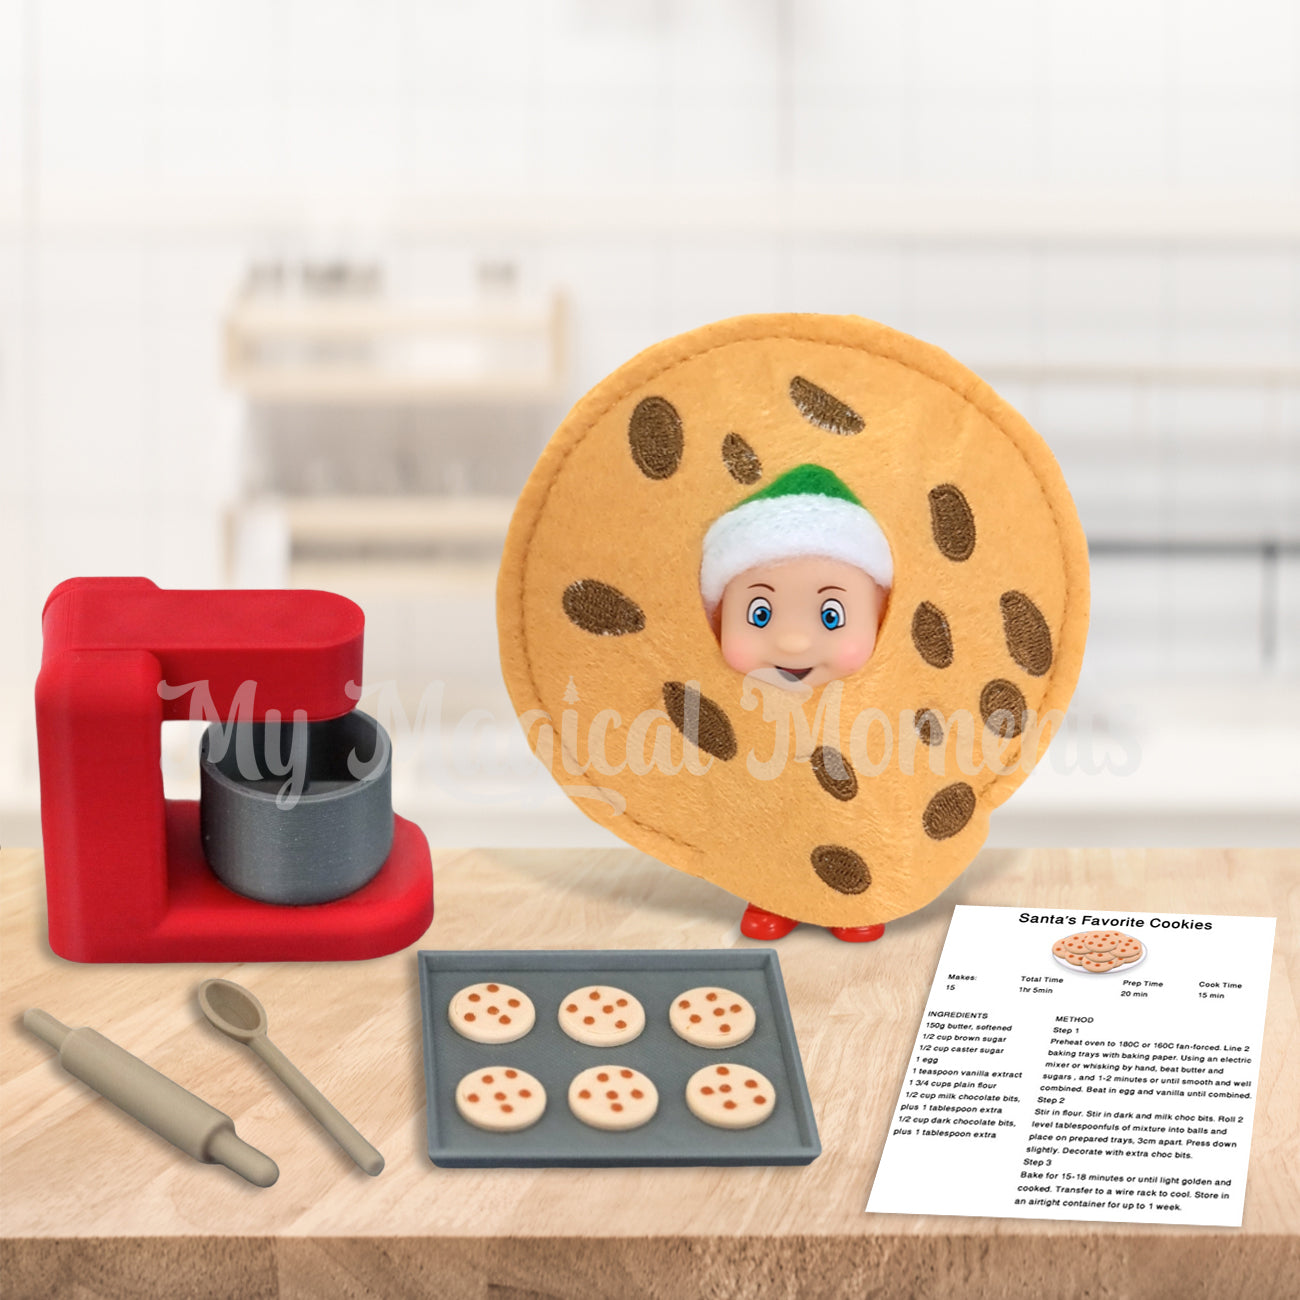 Elf baby dressed as a cookie with a mini recipe and baking set